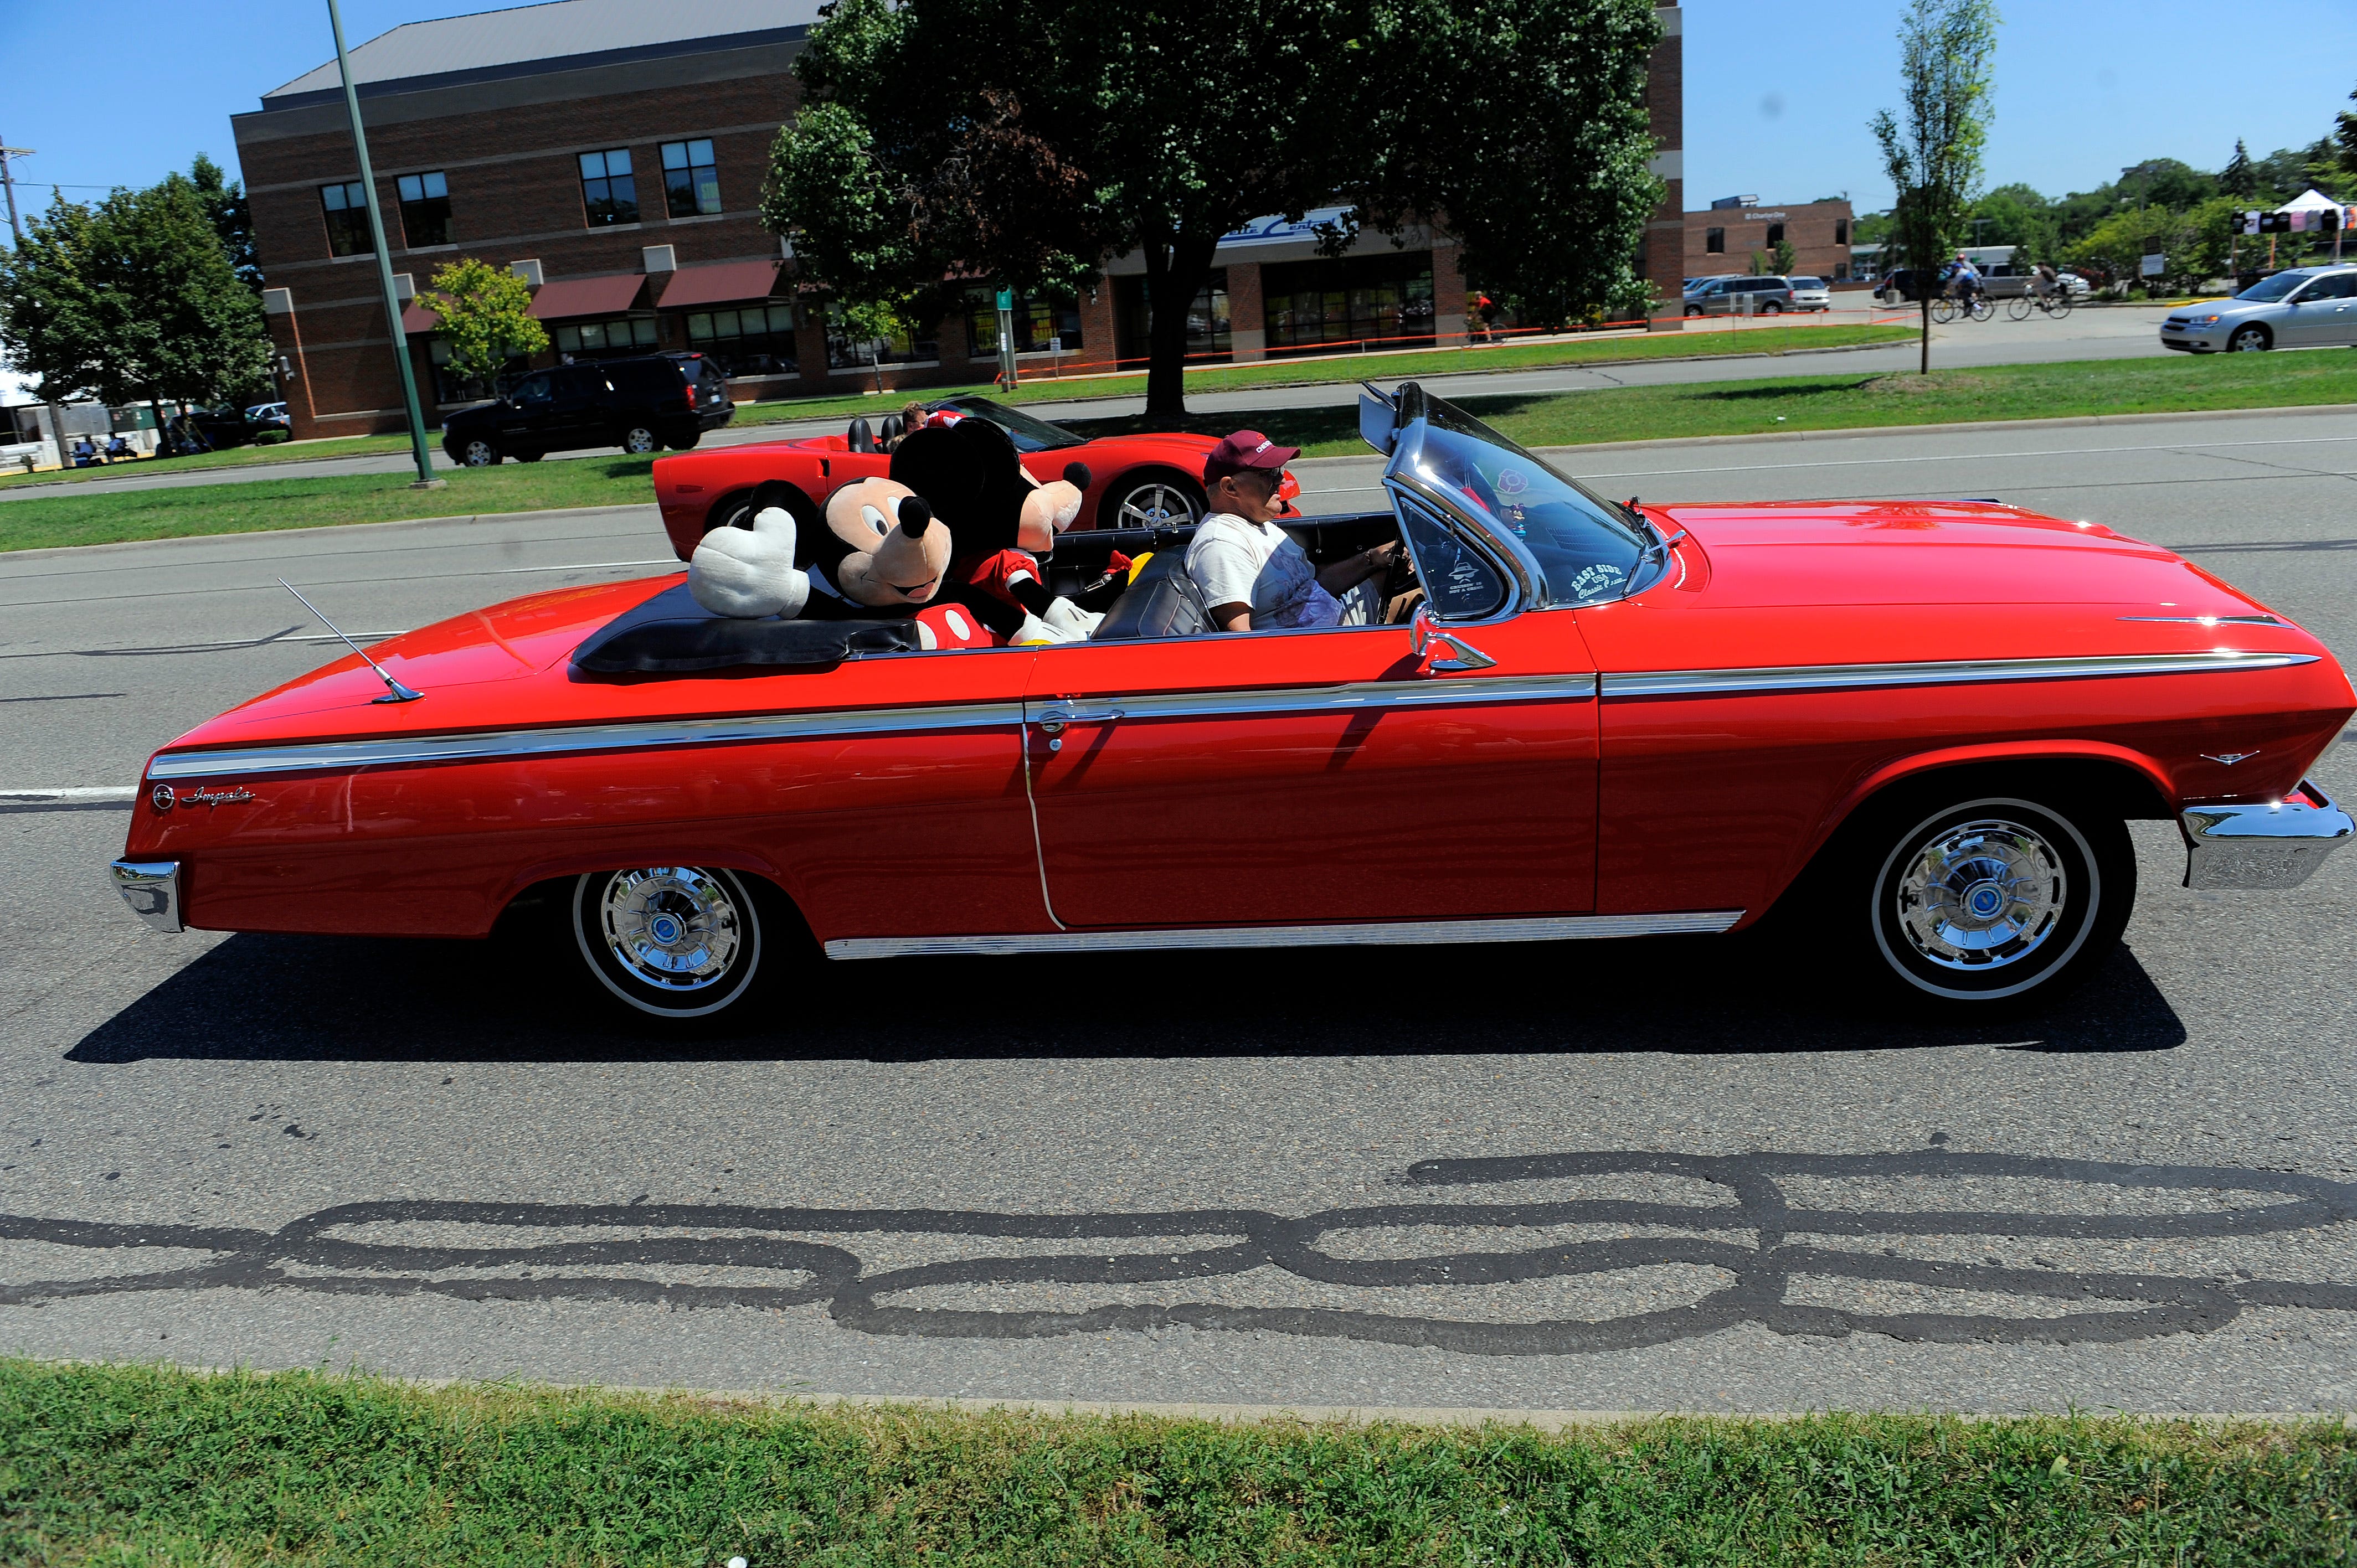 A 1963 Chevrolet Impala convertible filled with stuffed animals heads south on Woodward, Friday  Aug. 19, 2011.